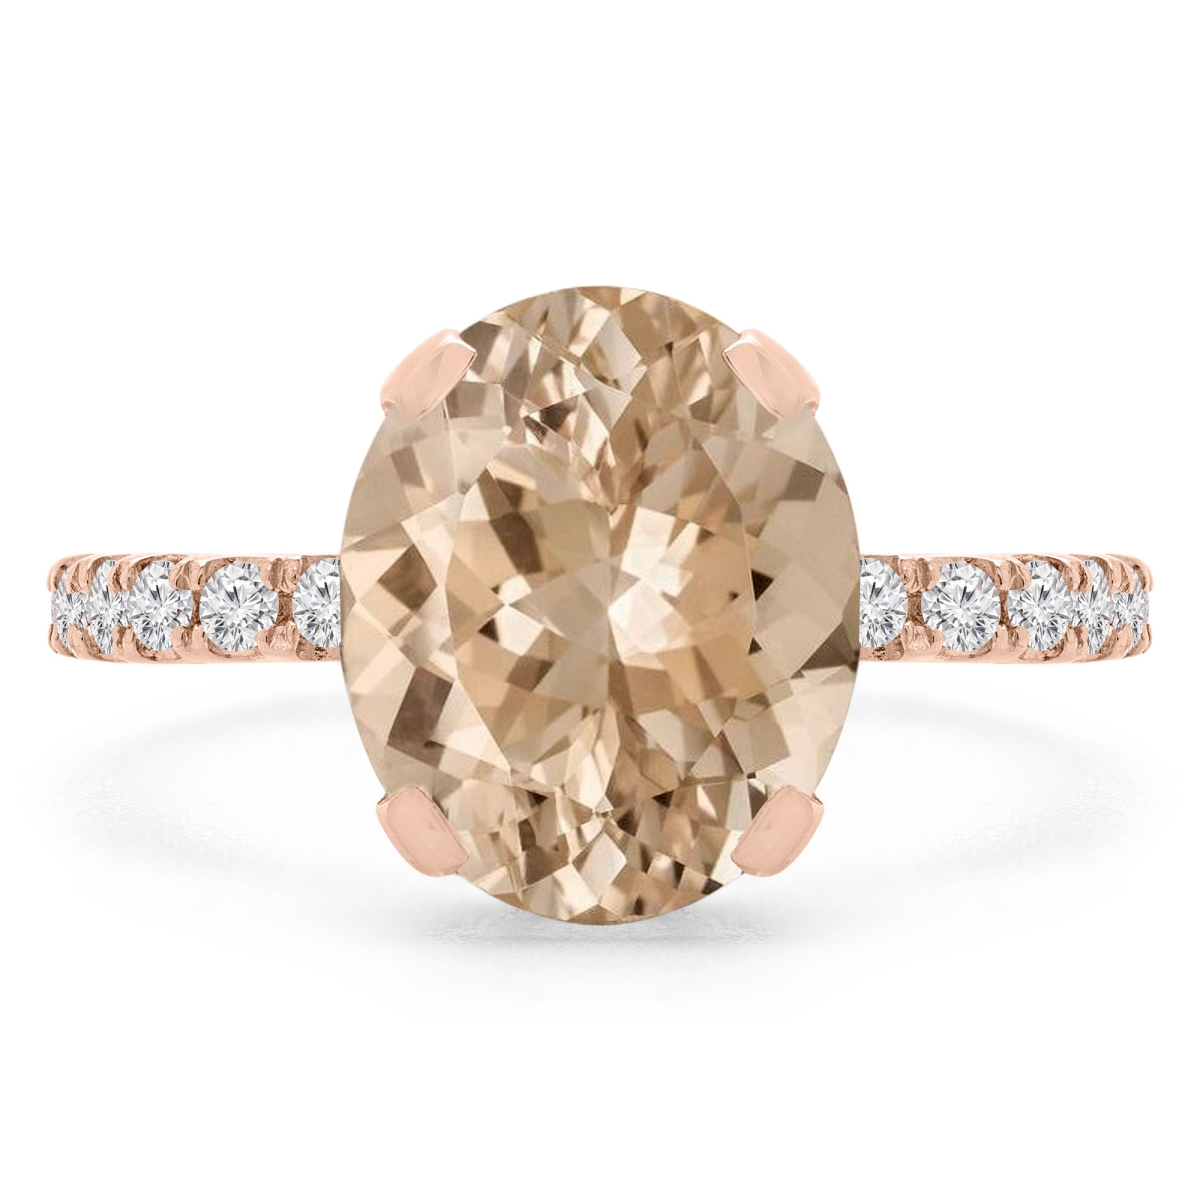 Picture of Majesty Diamonds MD190407-8.25 3.4 CTW Oval Pink Morganite Under Halo Engagement Ring in 14K Rose Gold - Size 8.25